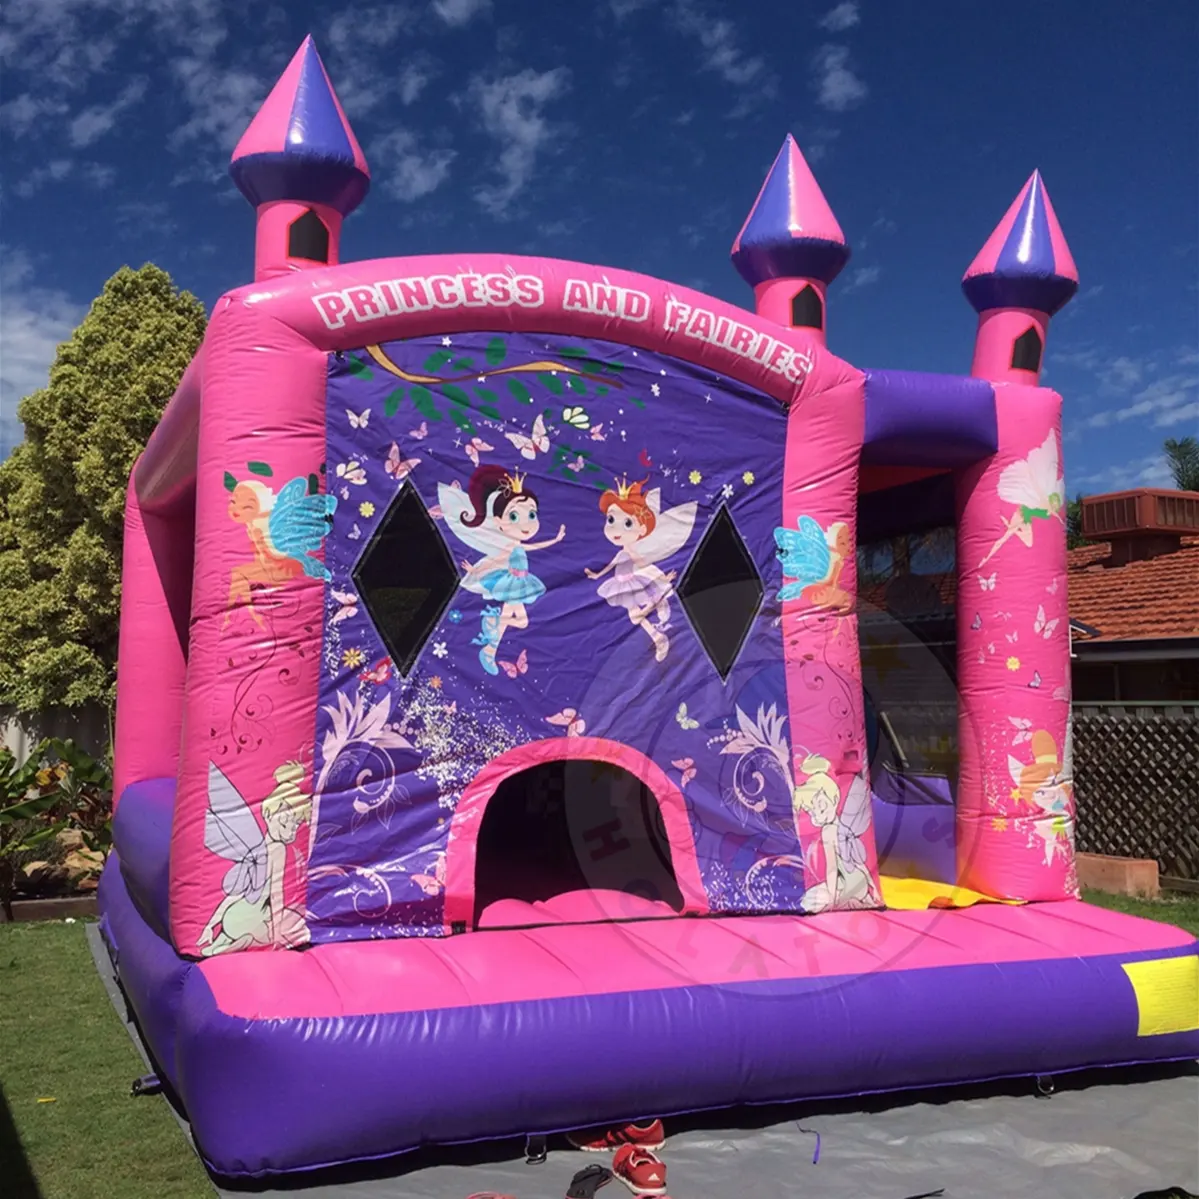 Hola toys pink inflatable bouncer/inflatable castle/bounce house